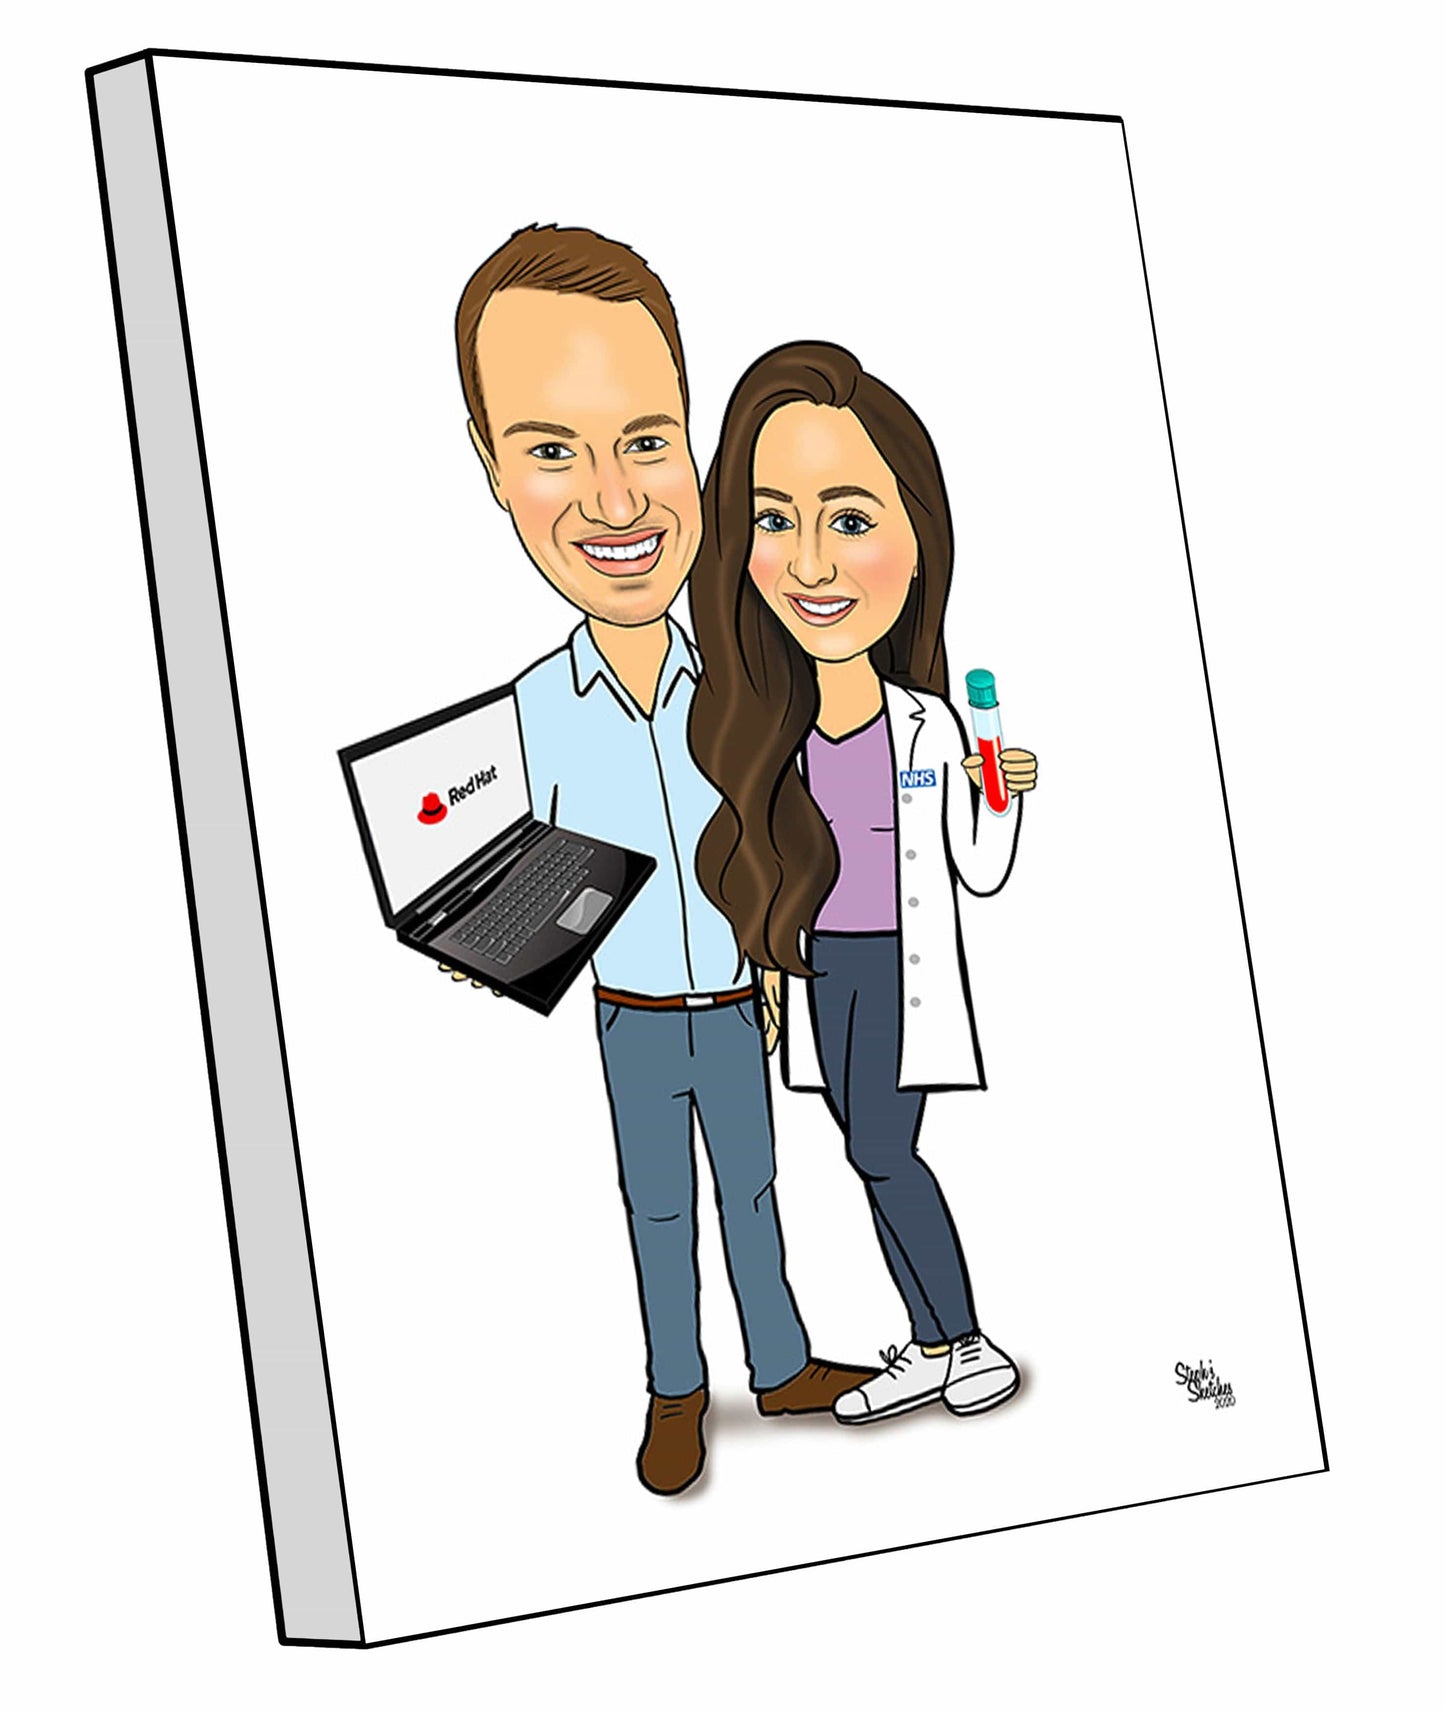 Custom Hand Drawn Caricature | Caricature Photos | Steph's Sketches